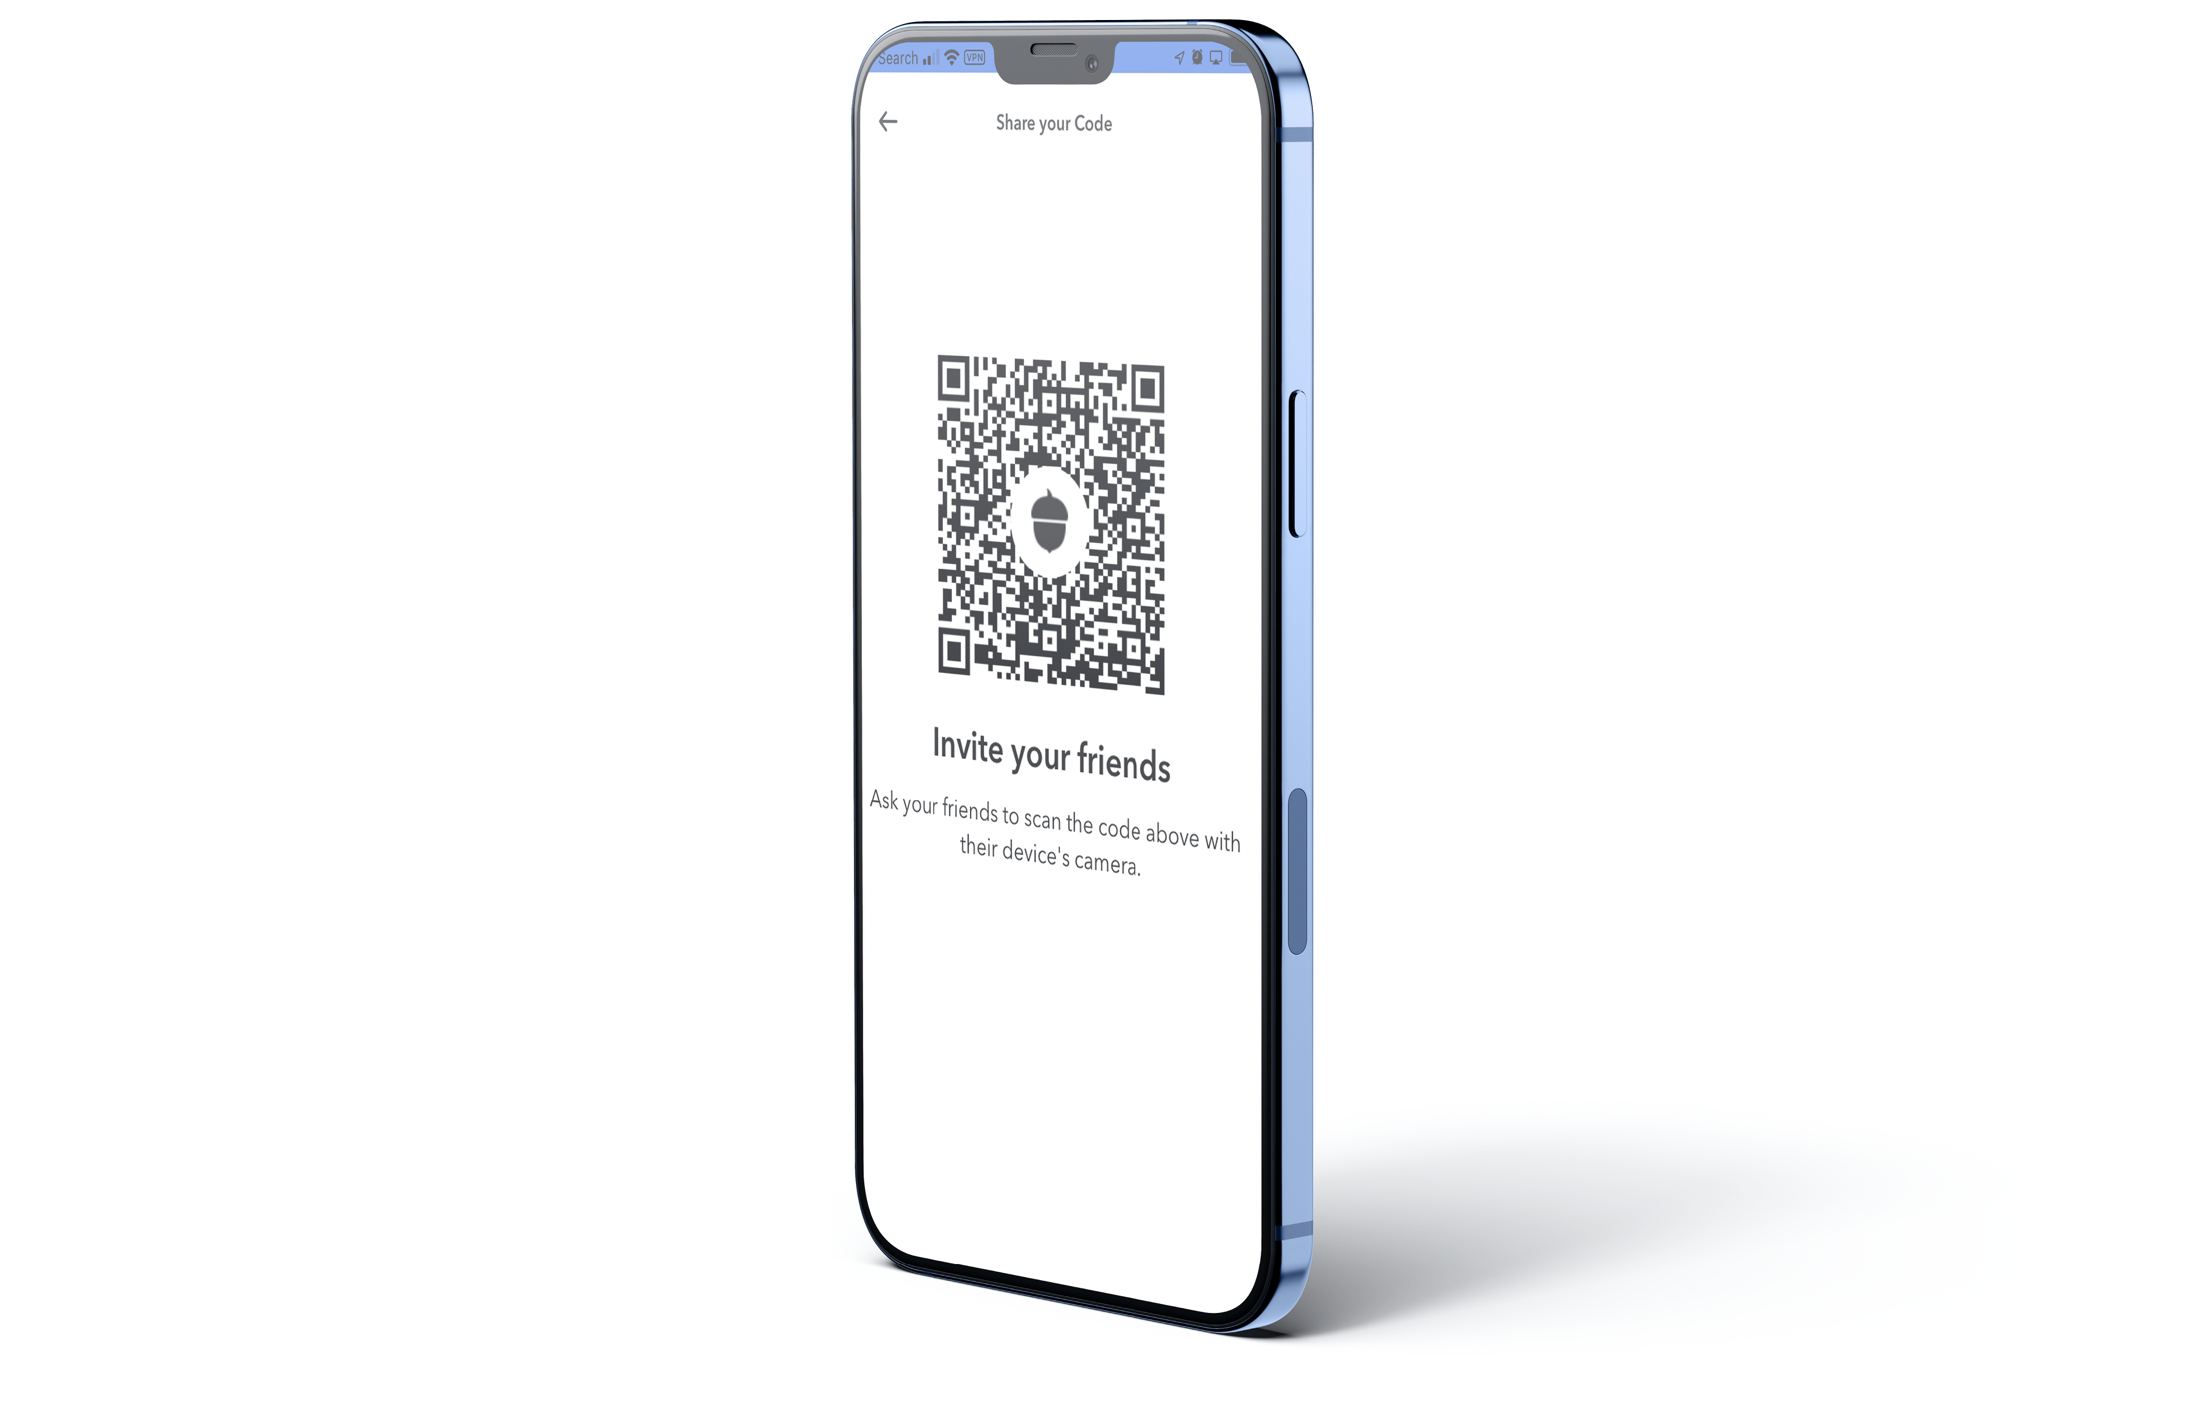 A phone displaying a QR code that friend can scan to use a referral program share code